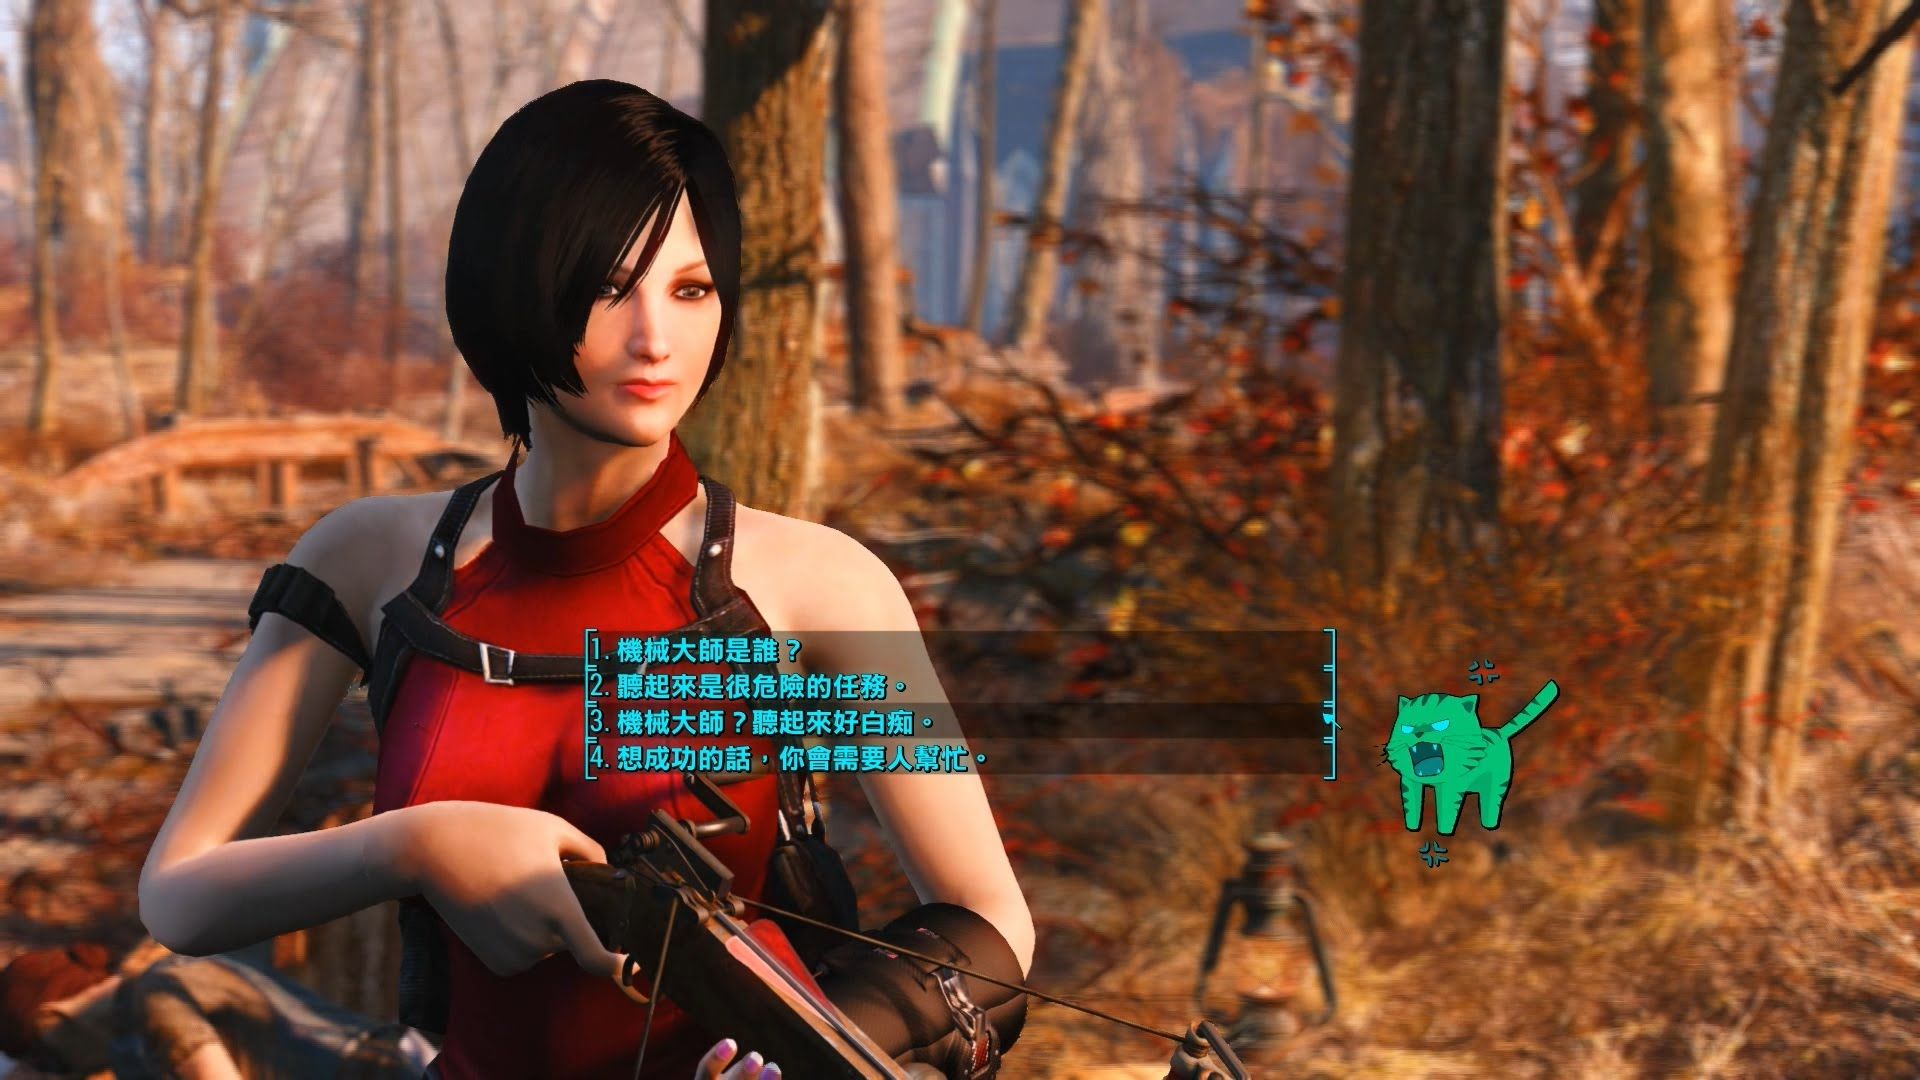 aniket phadnis recommends Fallout 4 Ada Mod